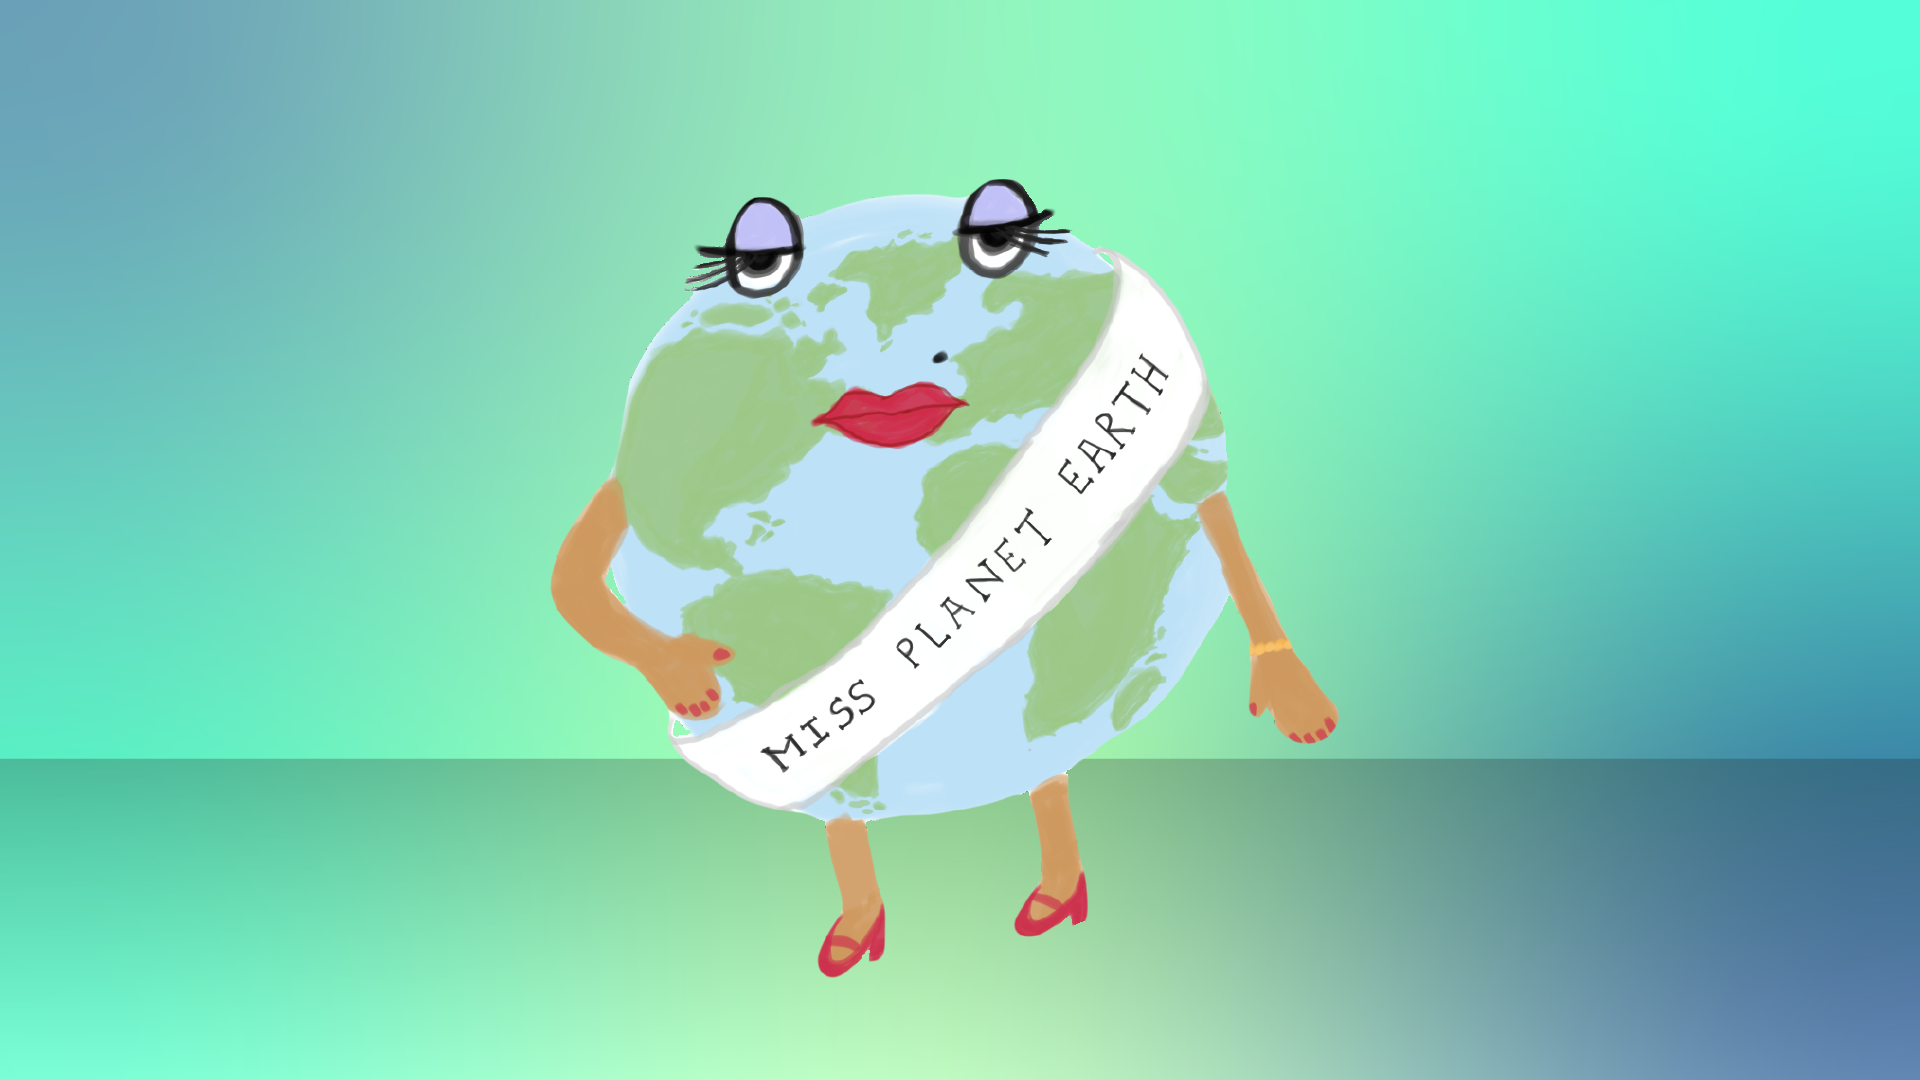 Earth wearing a sash that reads “Miss Planet Earth.” She has long eyelashes and purple eyeshadow and she’s wearing red high heeled shoes.